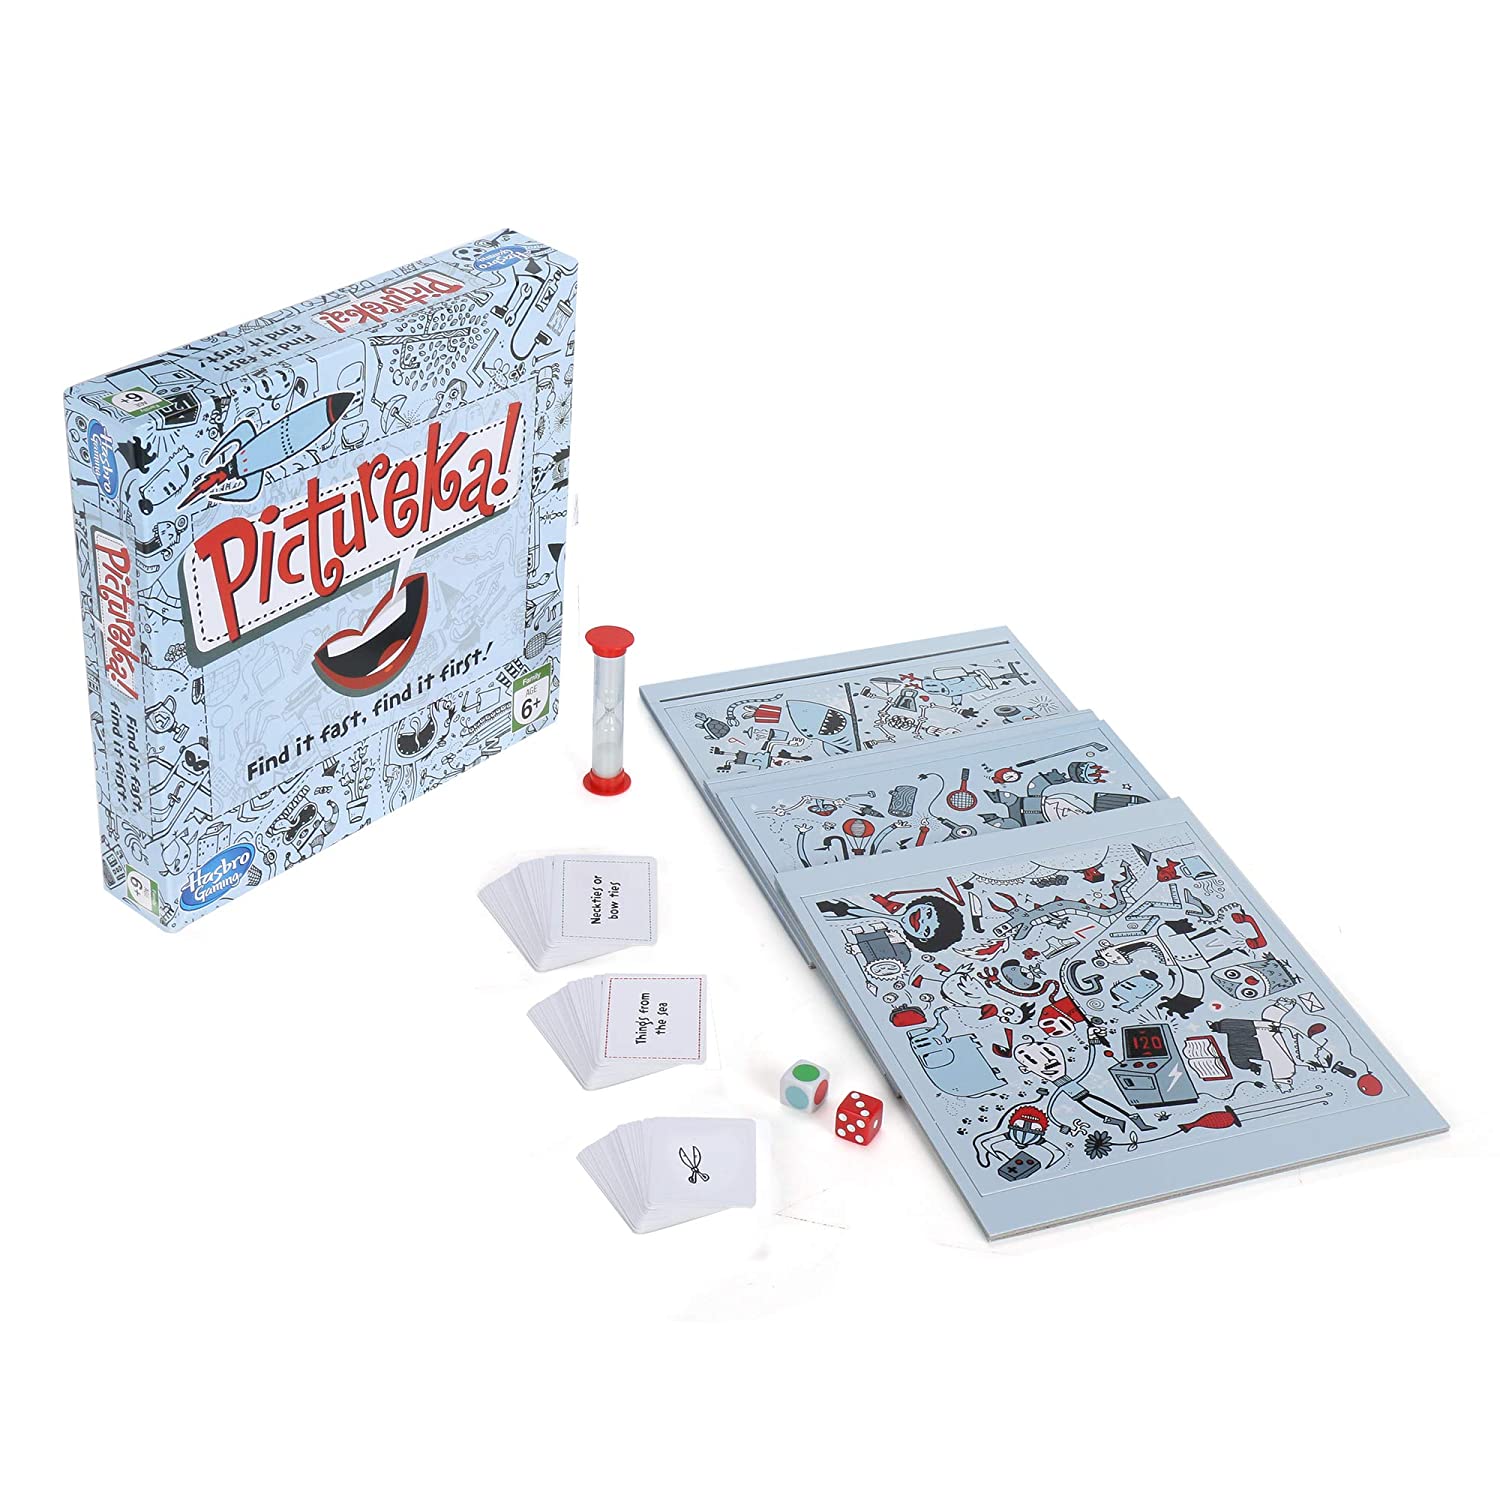 Hasbro Gaming Pictureka! Board Game For Family and Kids